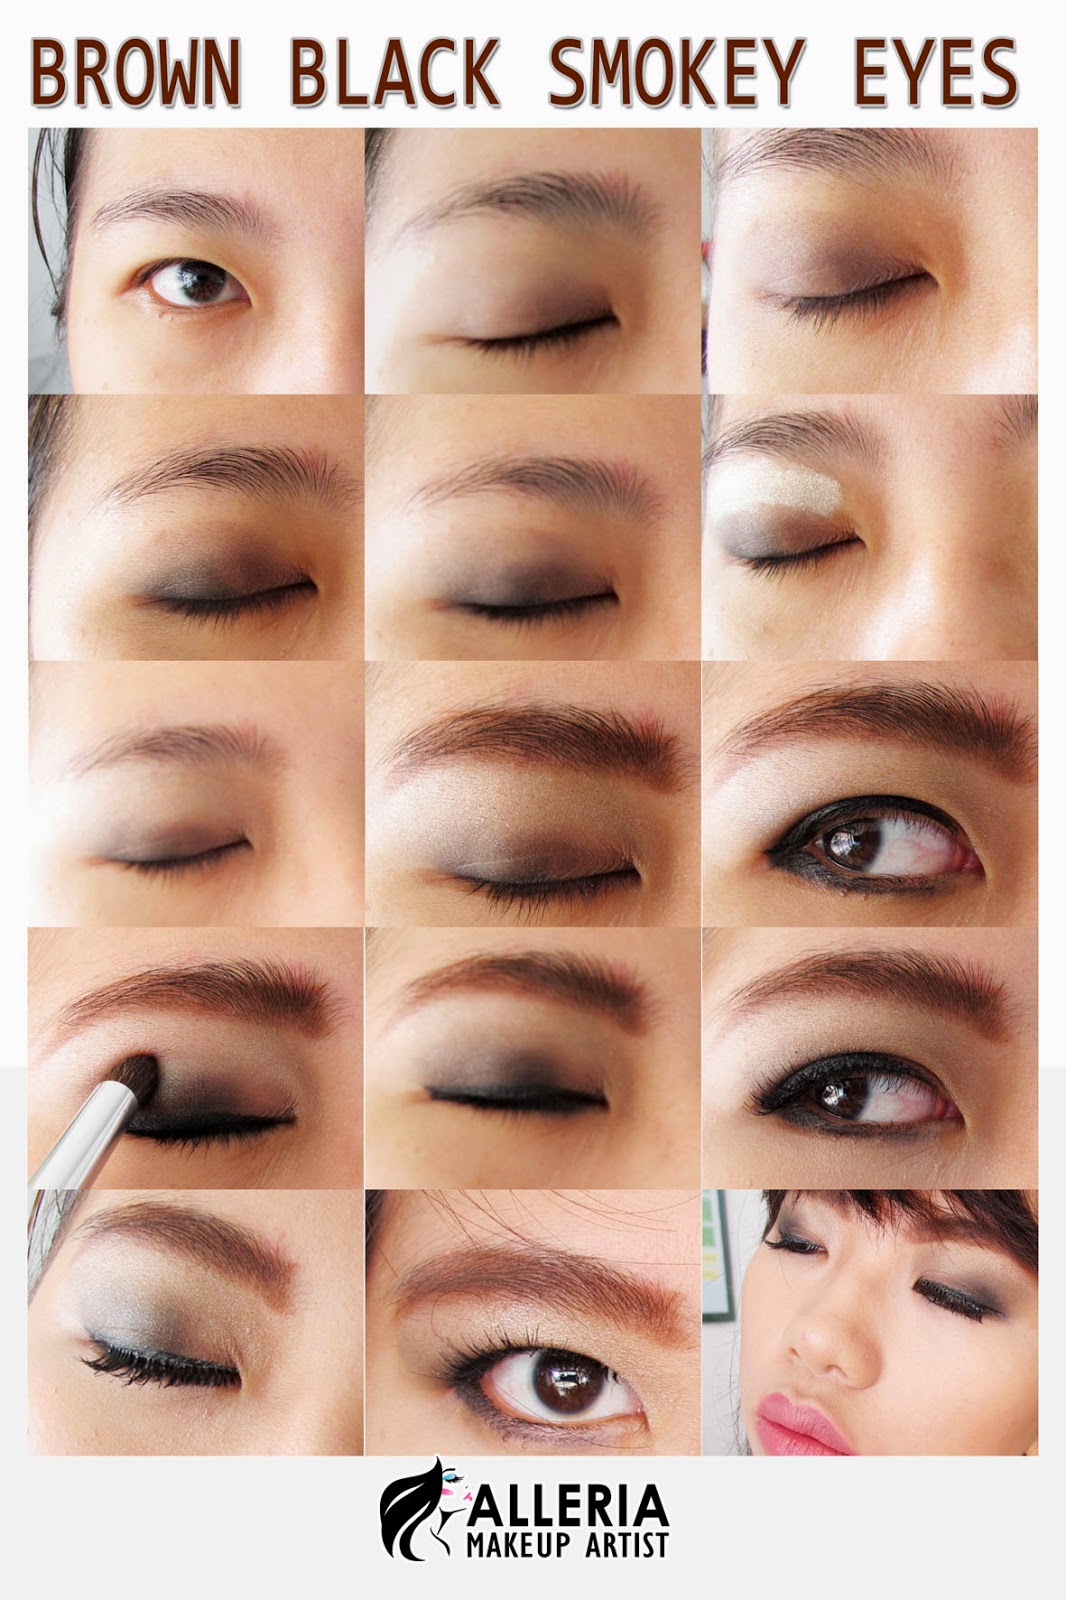 PICTORIAL EYE MAKEUP SHARE LEARN PLAY FUN JUST FOR FUN